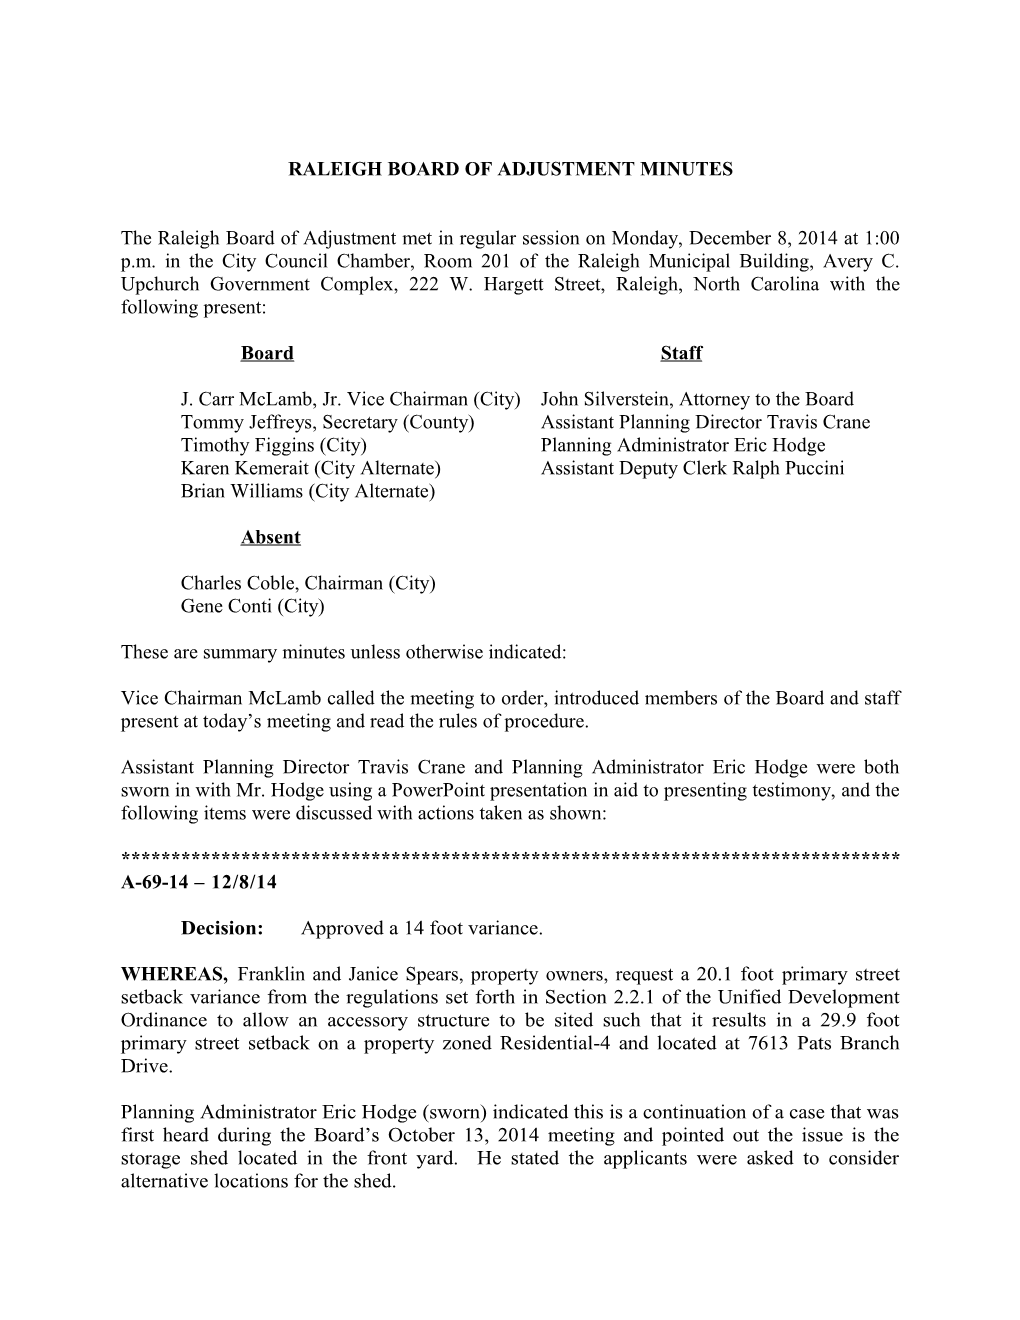 Raleigh Board of Adjustment Minutes - 12/08/2014